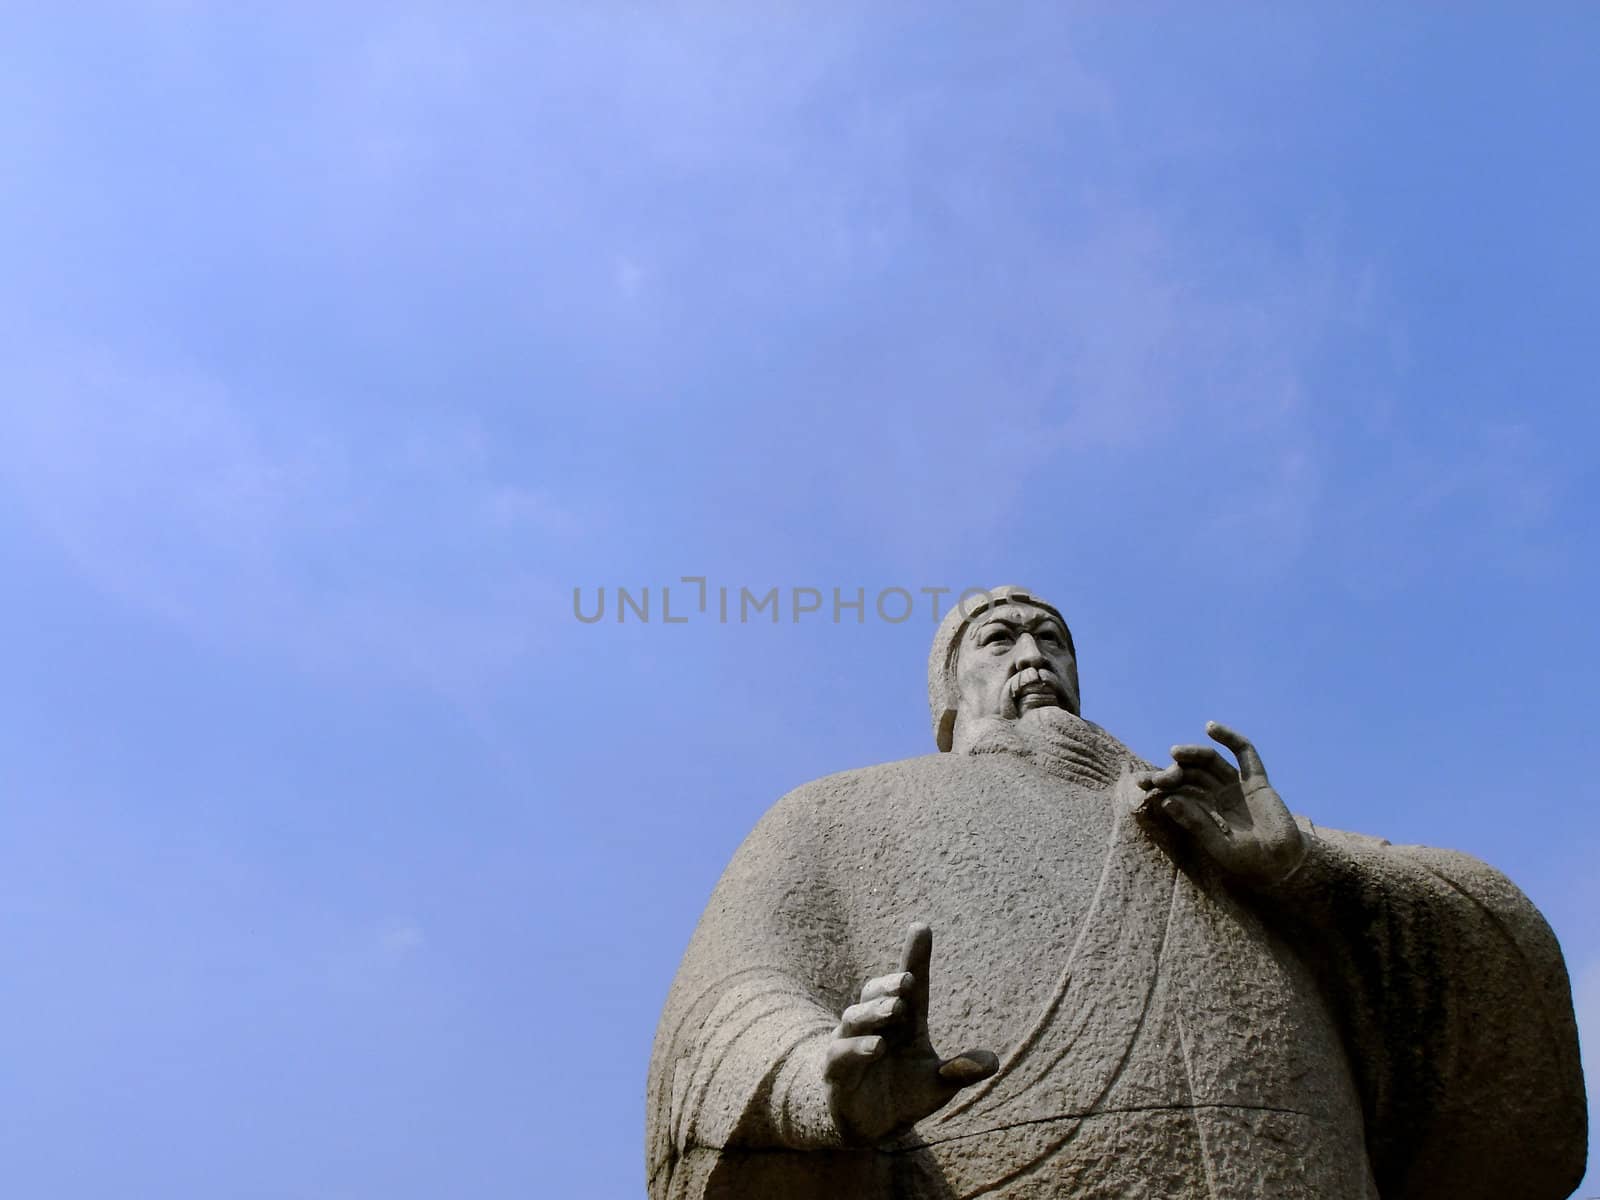 Statue and blue sky by gracethang